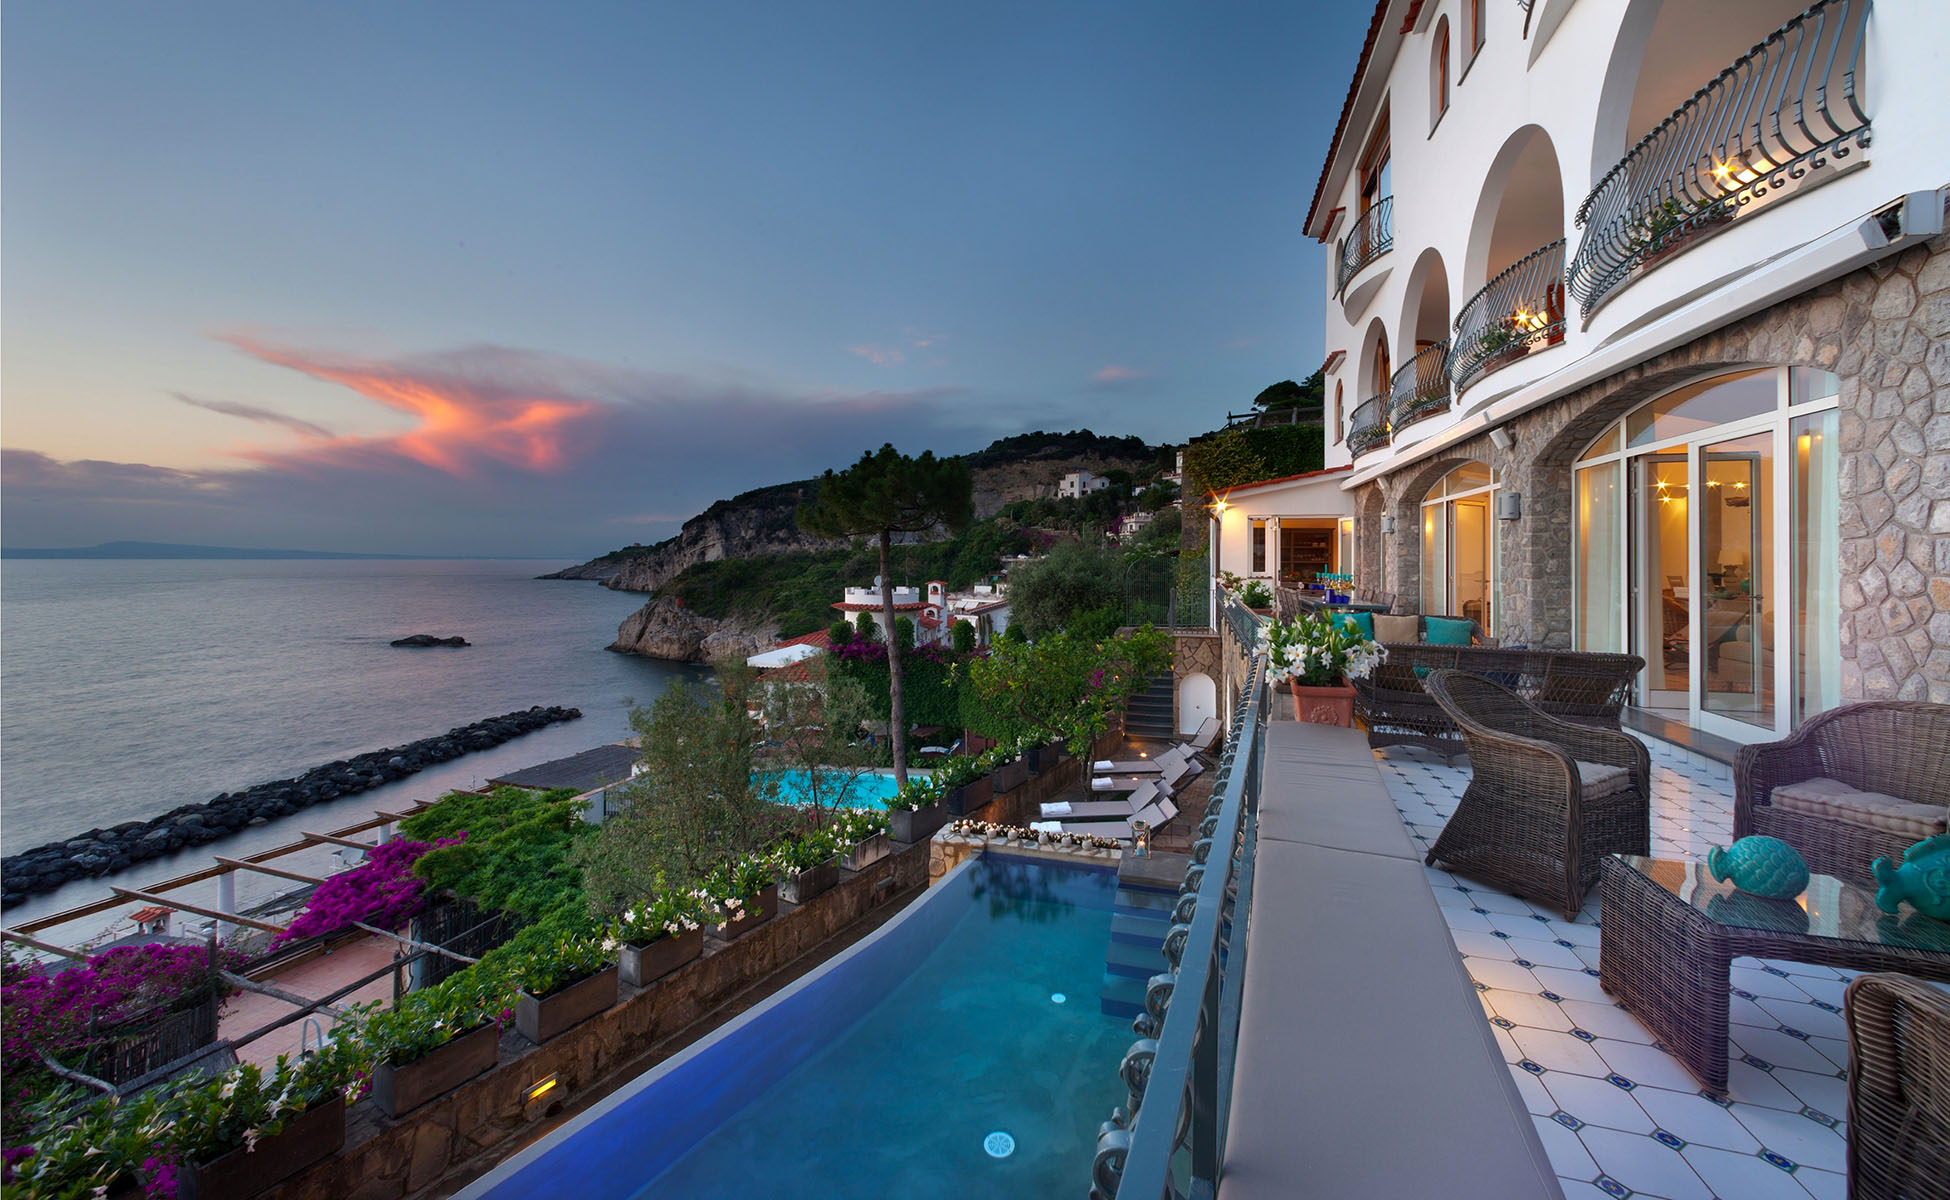 <p>Lovelydays Luxury Rentals introduce you pictures of a charming house in the heart of Sorrento Peninsula</p>